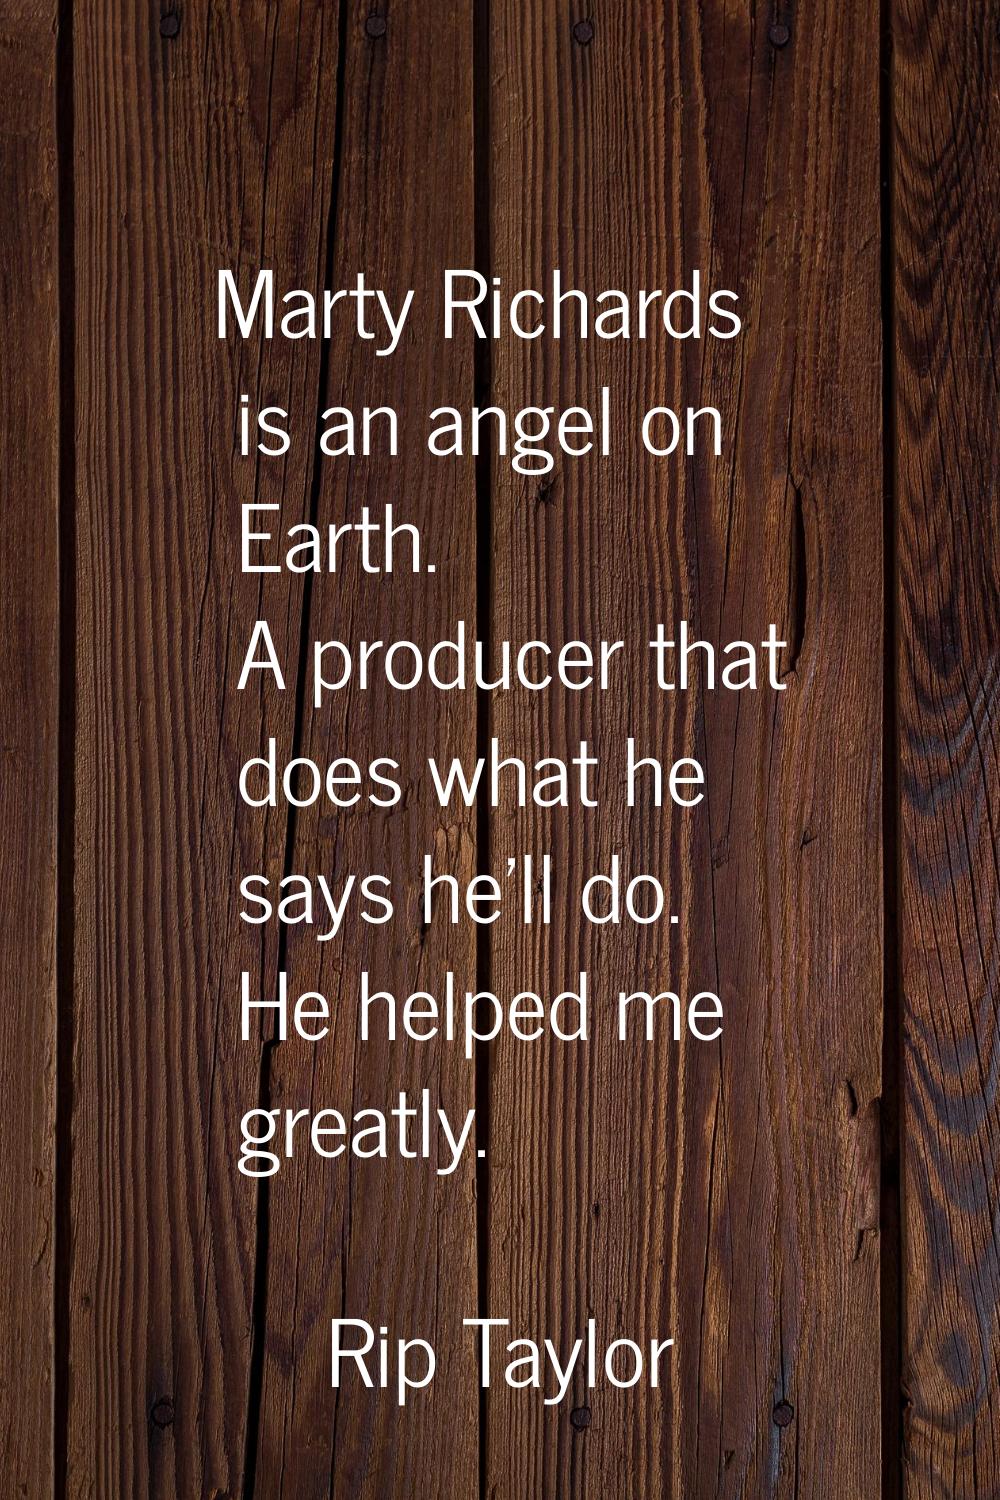 Marty Richards is an angel on Earth. A producer that does what he says he'll do. He helped me great